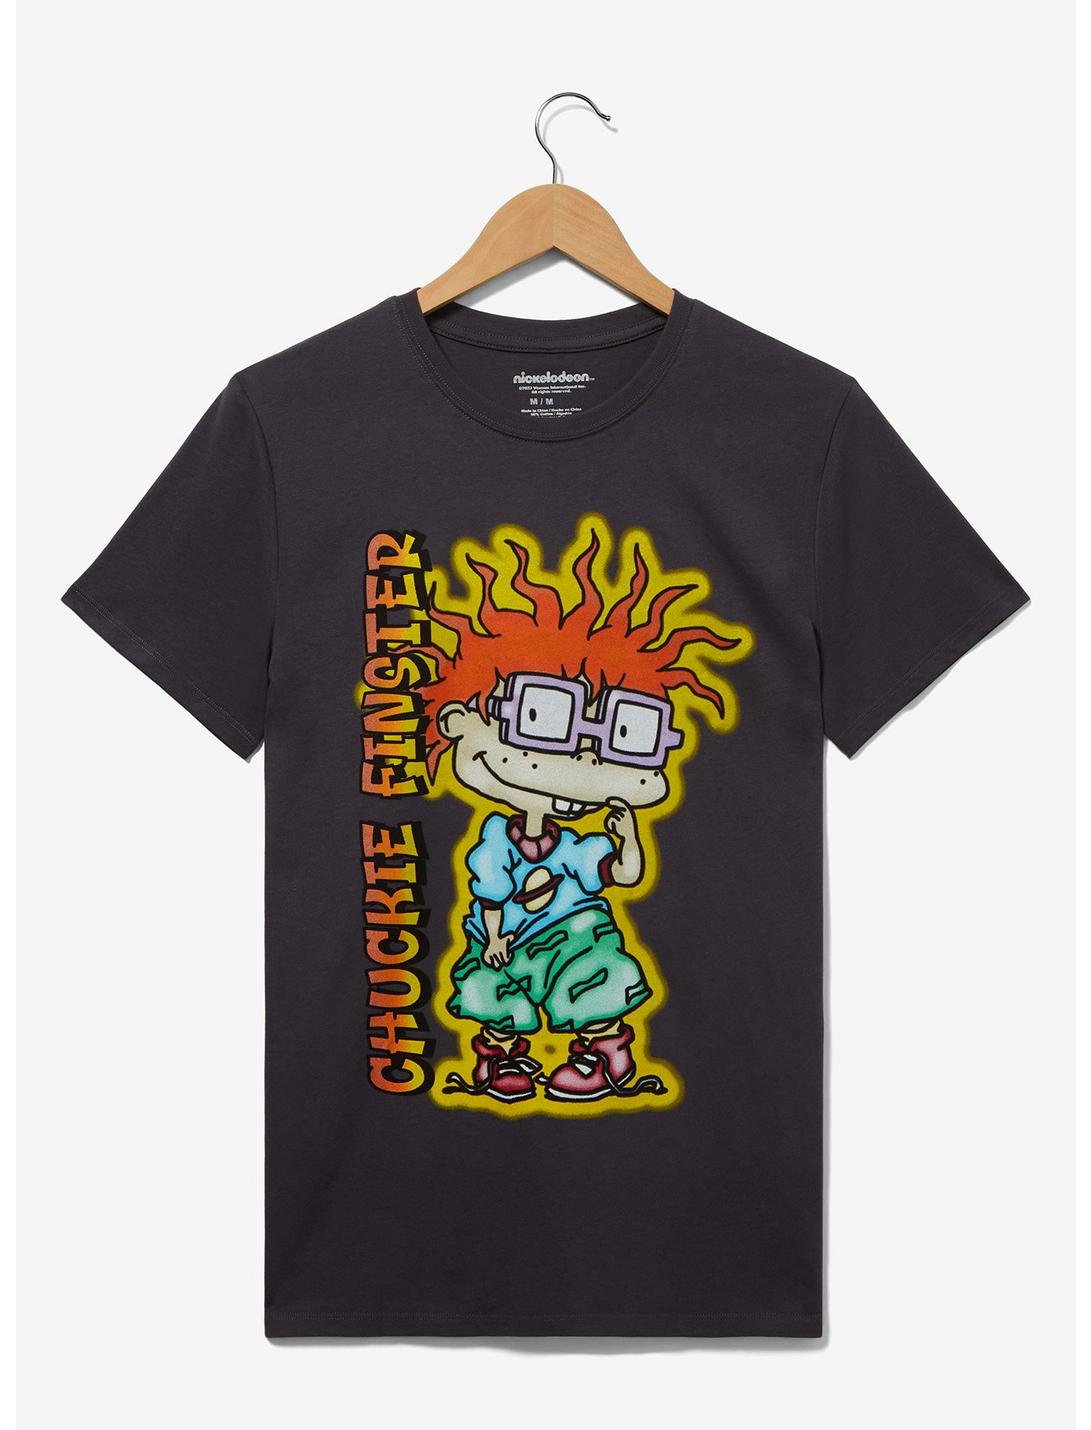 Rugrats Chuckie Finster Women's T-Shirt - BoxLunch Exclusive, BLACK, hi-res